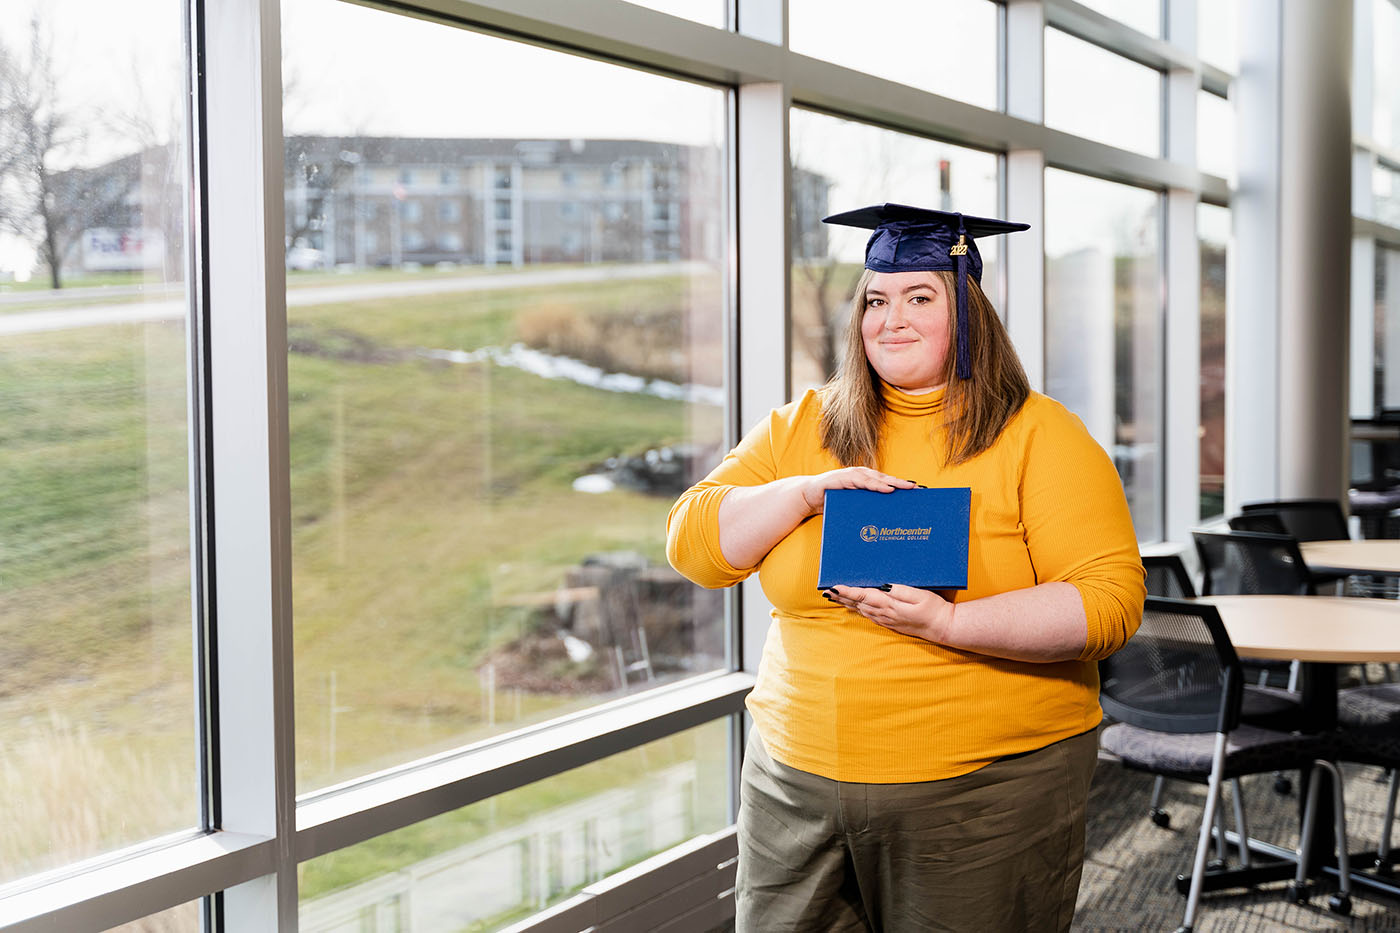 Daryl posing while wearing an NTC graduation cap and holding her diploma.